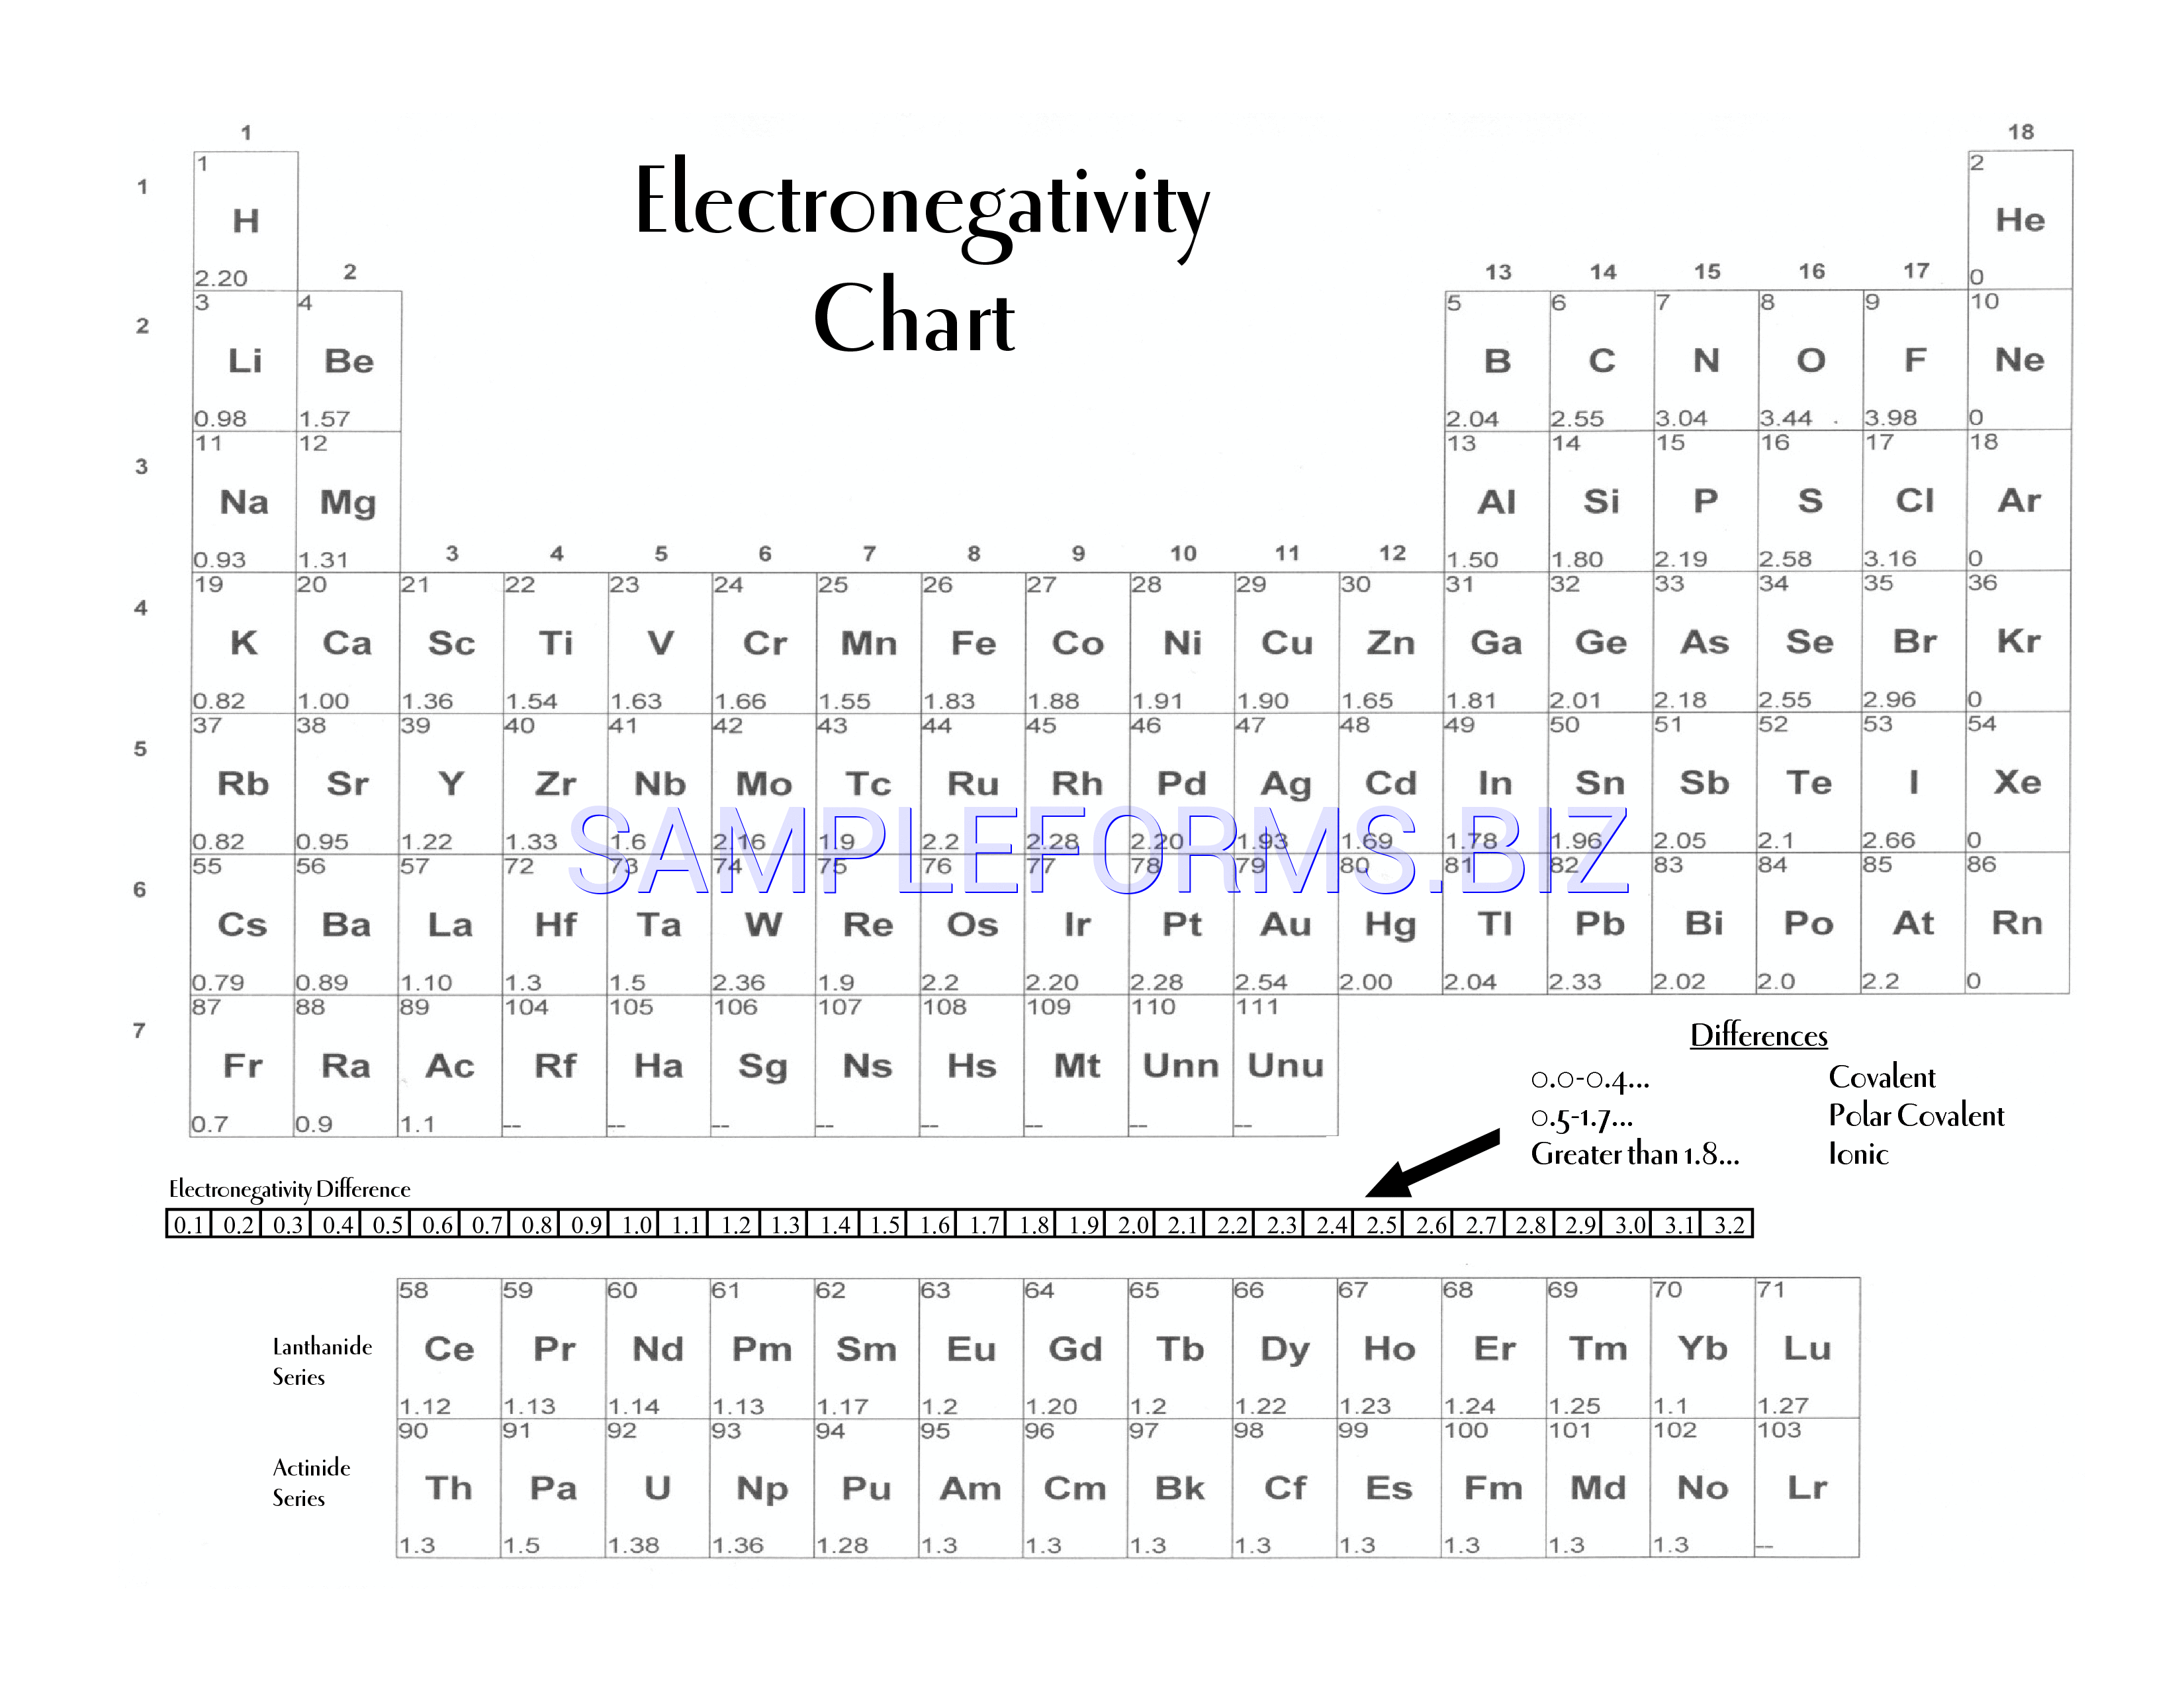 electronegativity periodic table